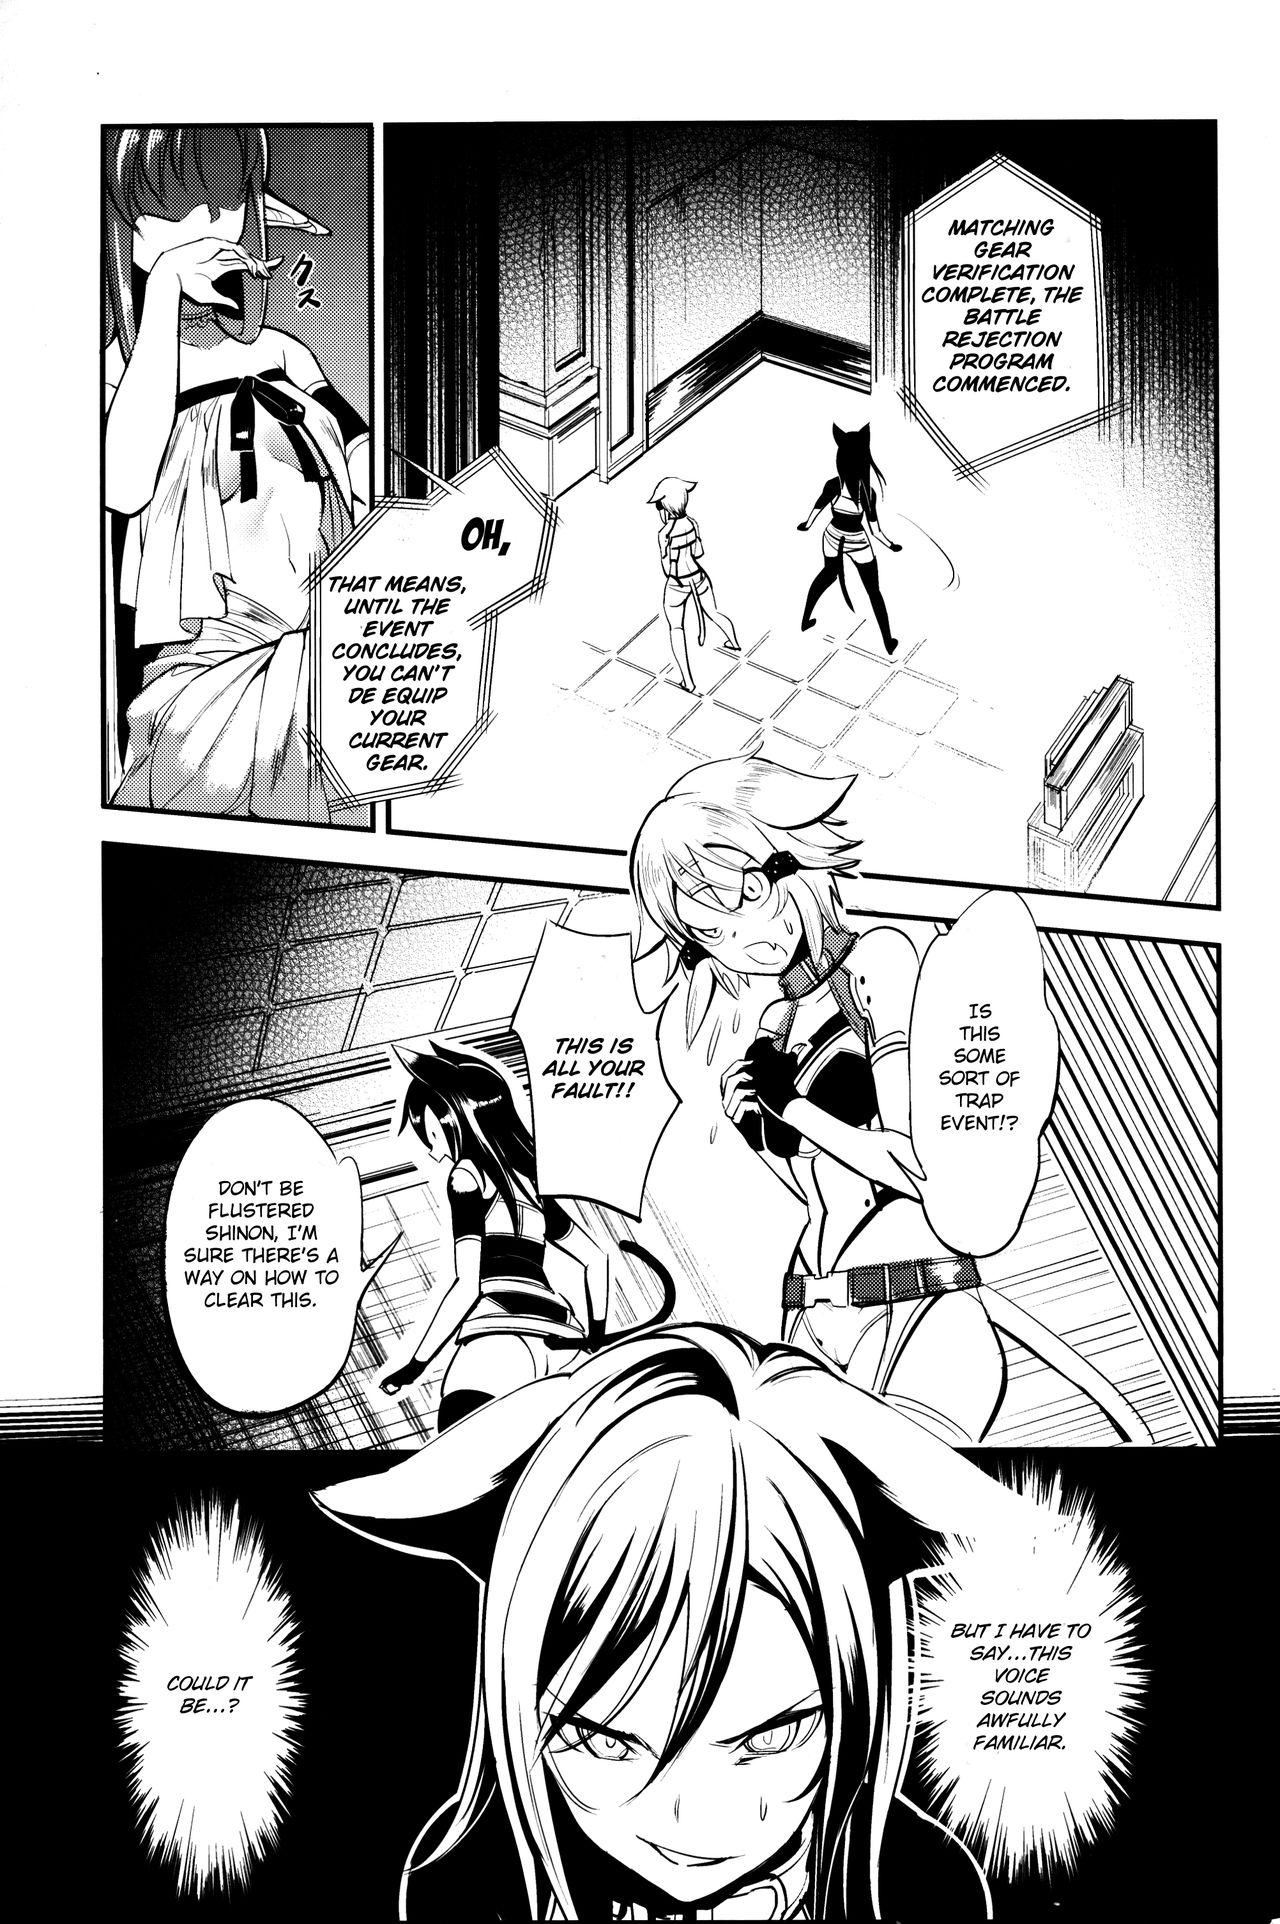 Red MONSTER HOUSE QUEST - Sword art online Banheiro - Page 4